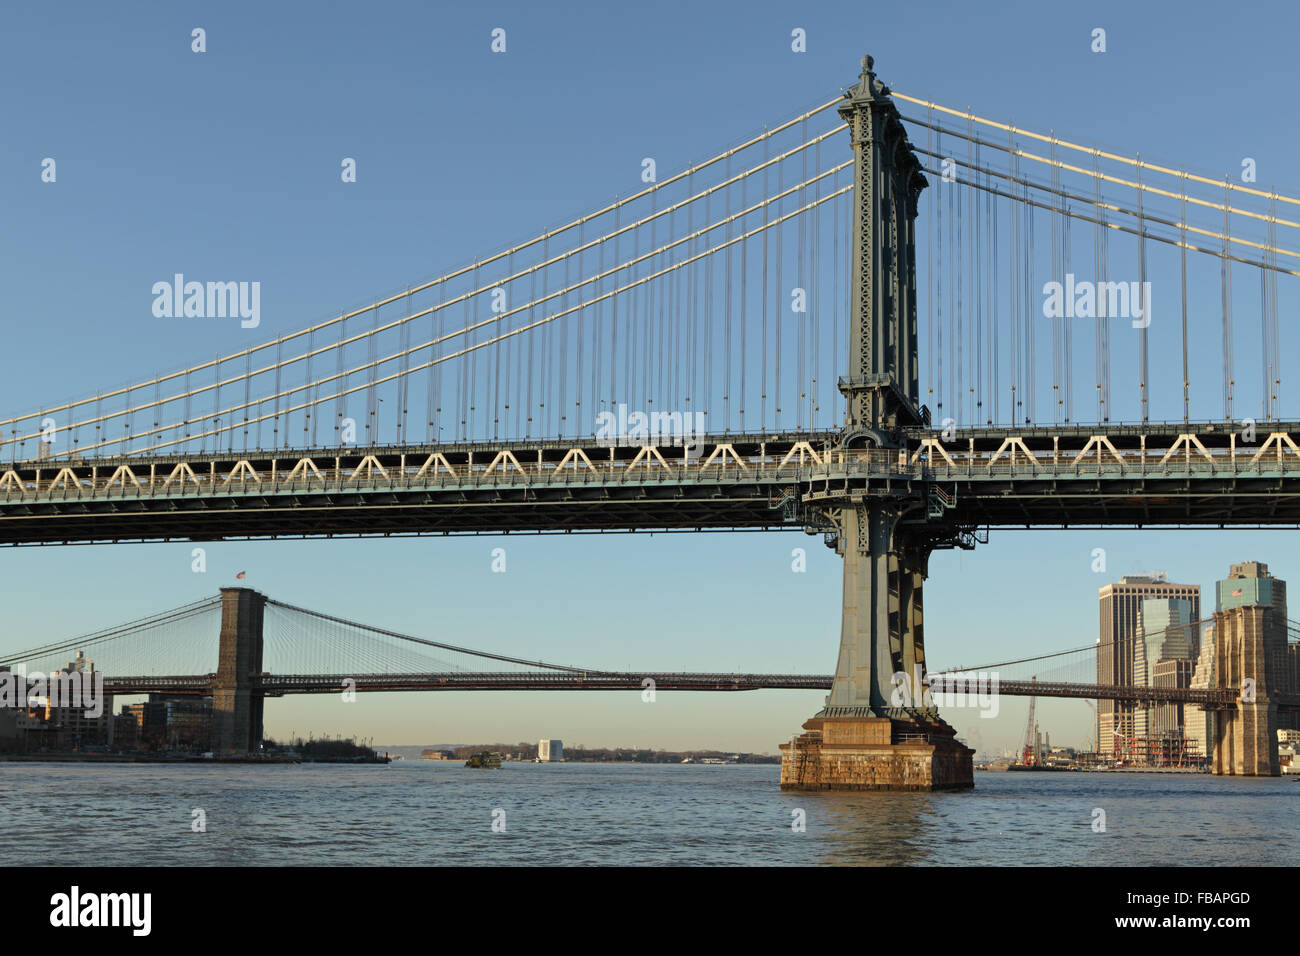 Manhattan Bridge and Brooklyn Bridge, both spanning the East River and joining Brooklyn to Manhattan's Lower East Side in NYC Stock Photo